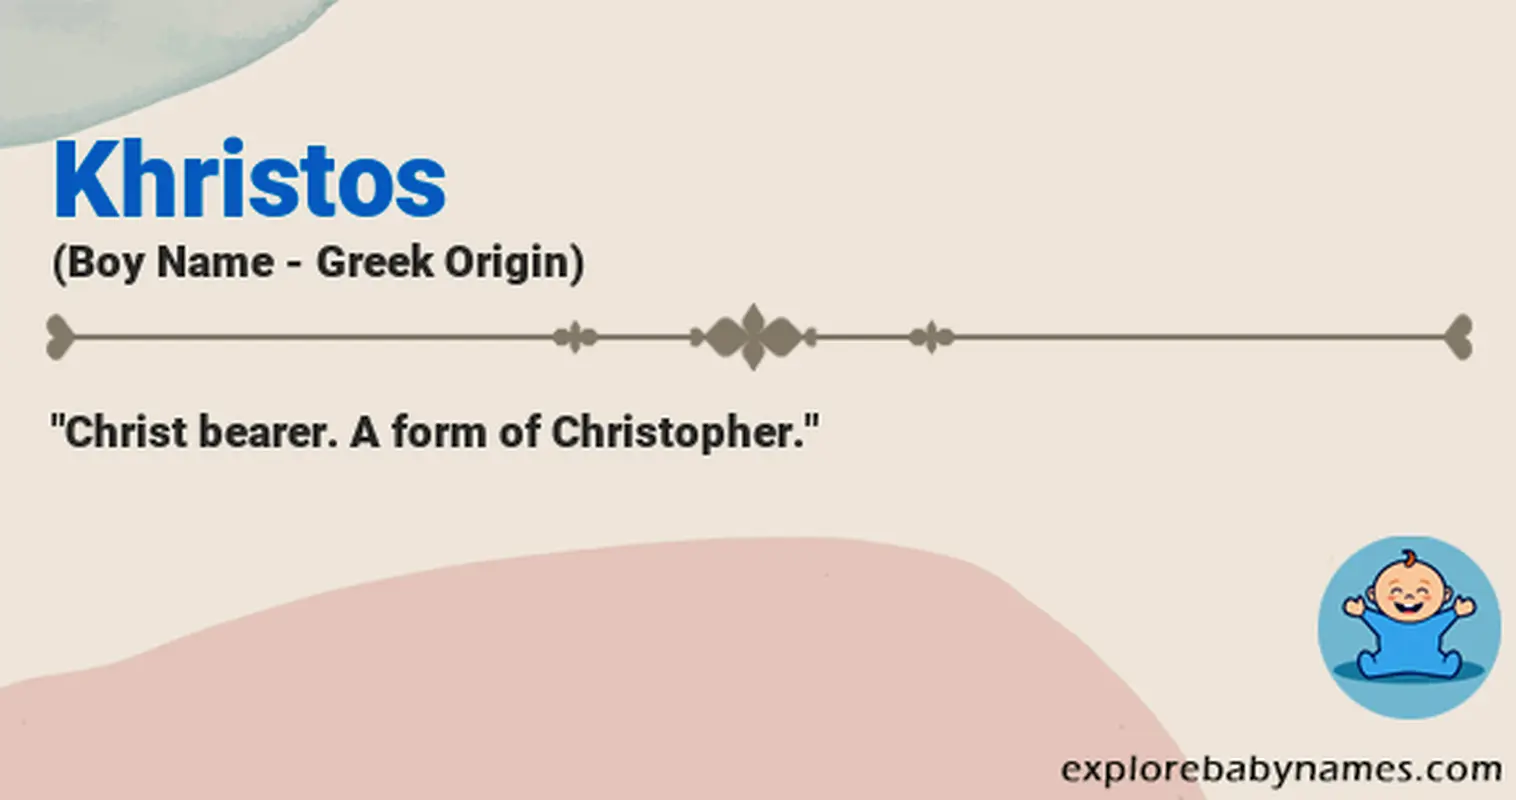 Meaning of Khristos